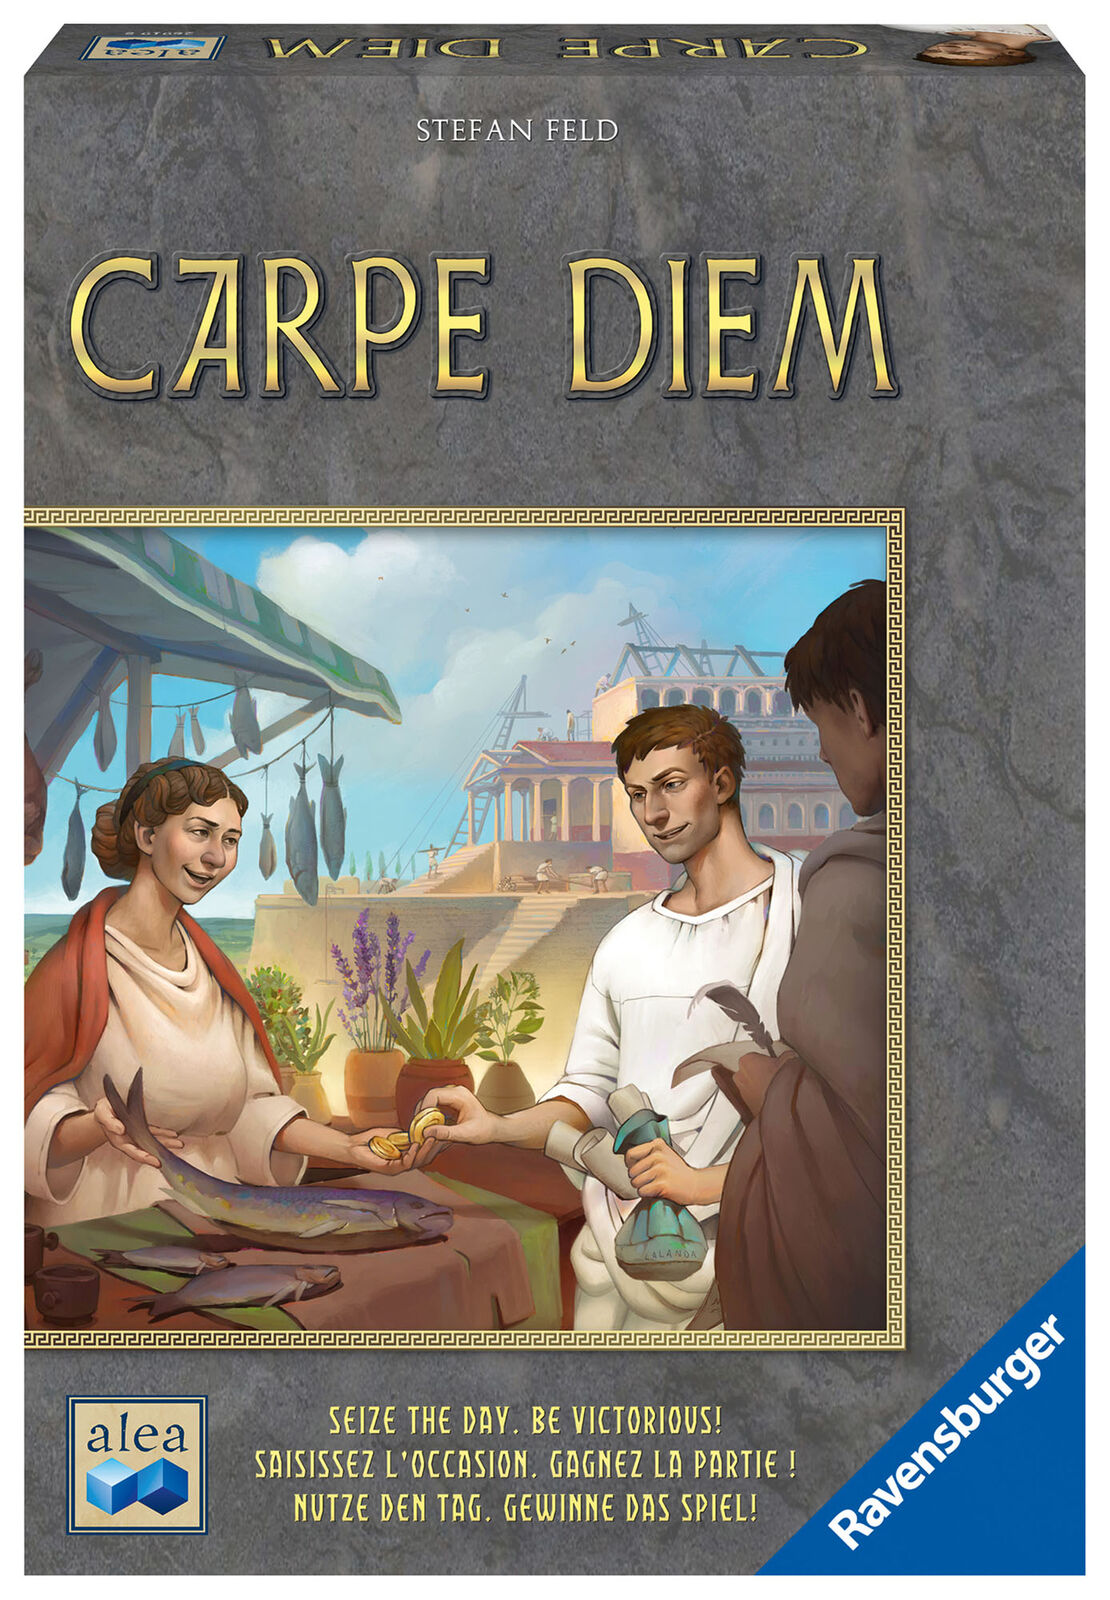 26919 Ravensburger Carpe Diem Strategy Board Game Suitable for Ages 10+